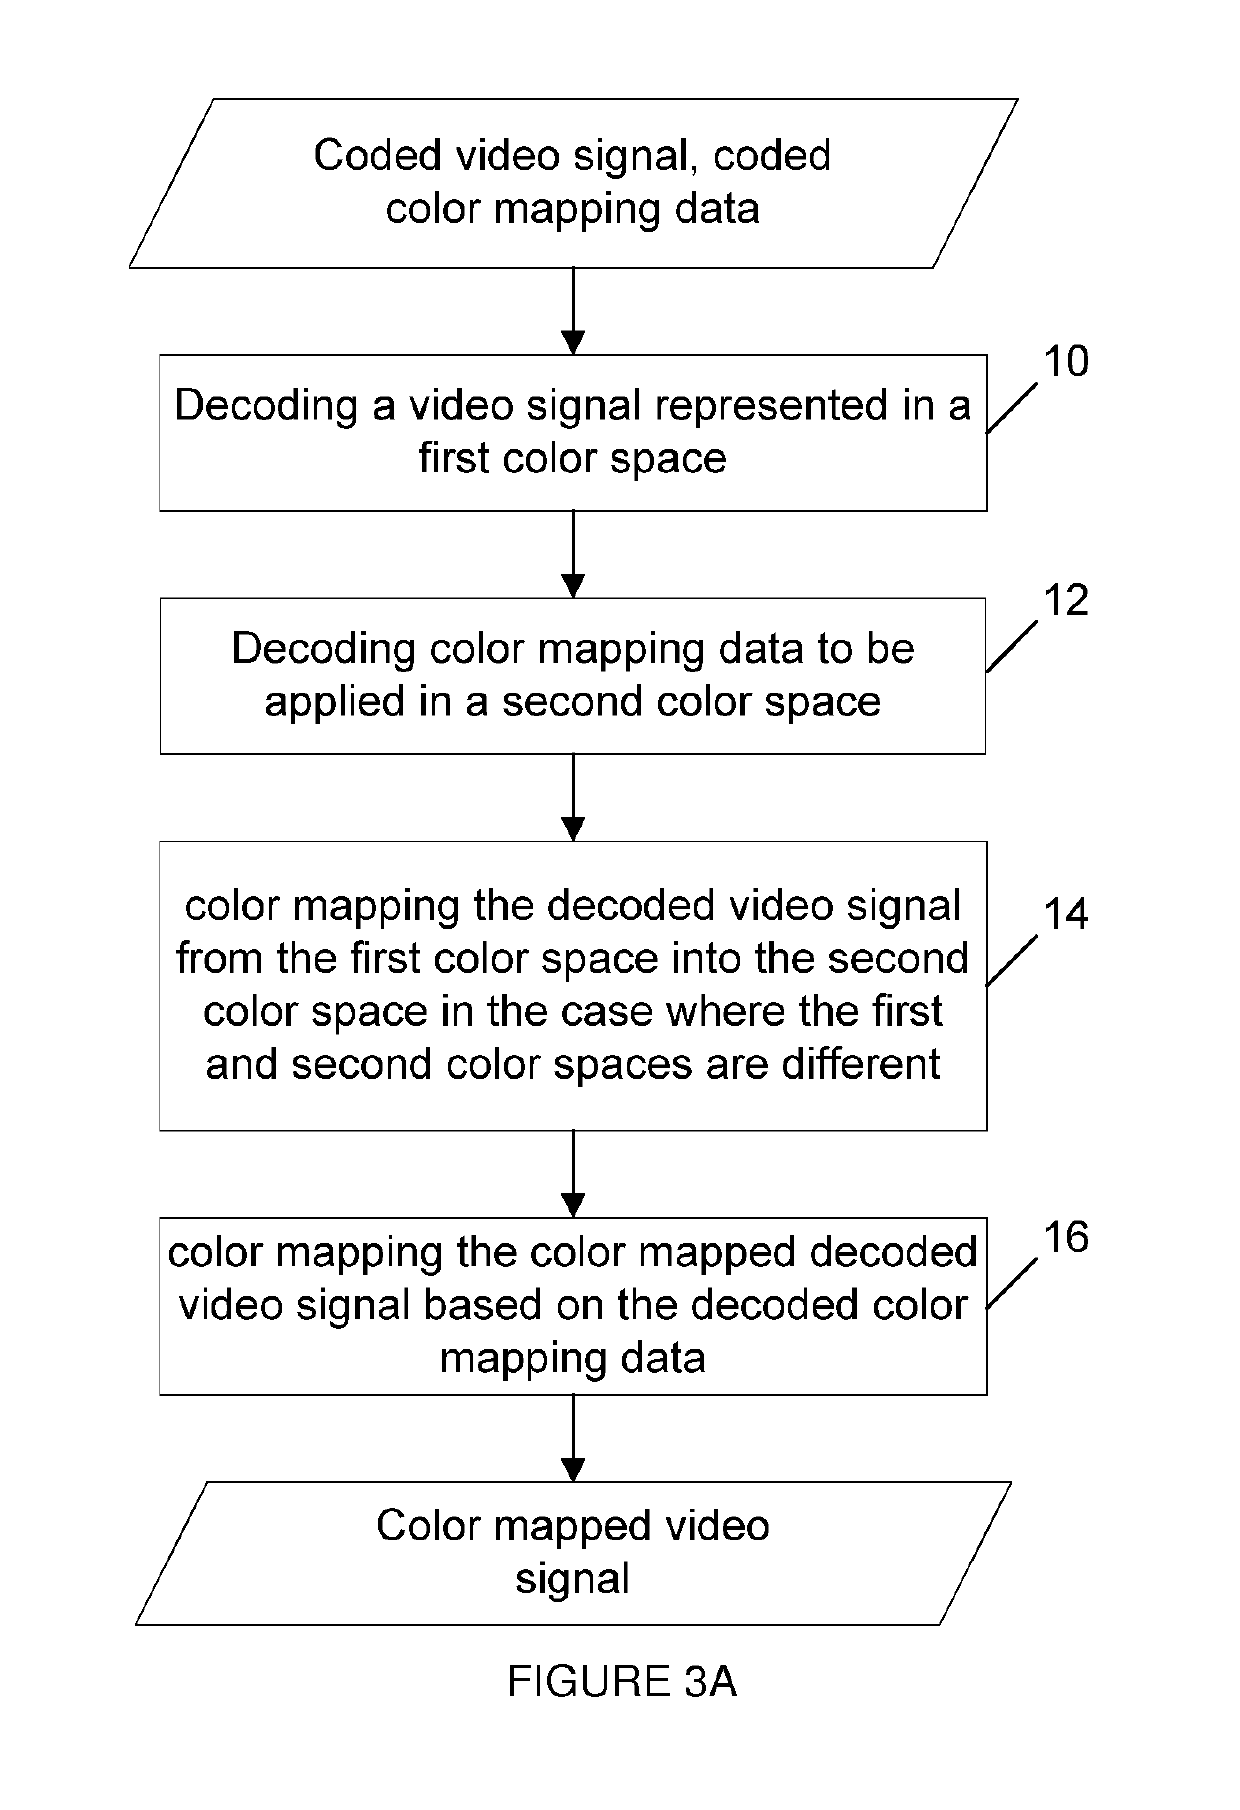 Method for color mapping a video signal based on color mapping data and method of encoding a video signal and color mapping data and corresponding devices